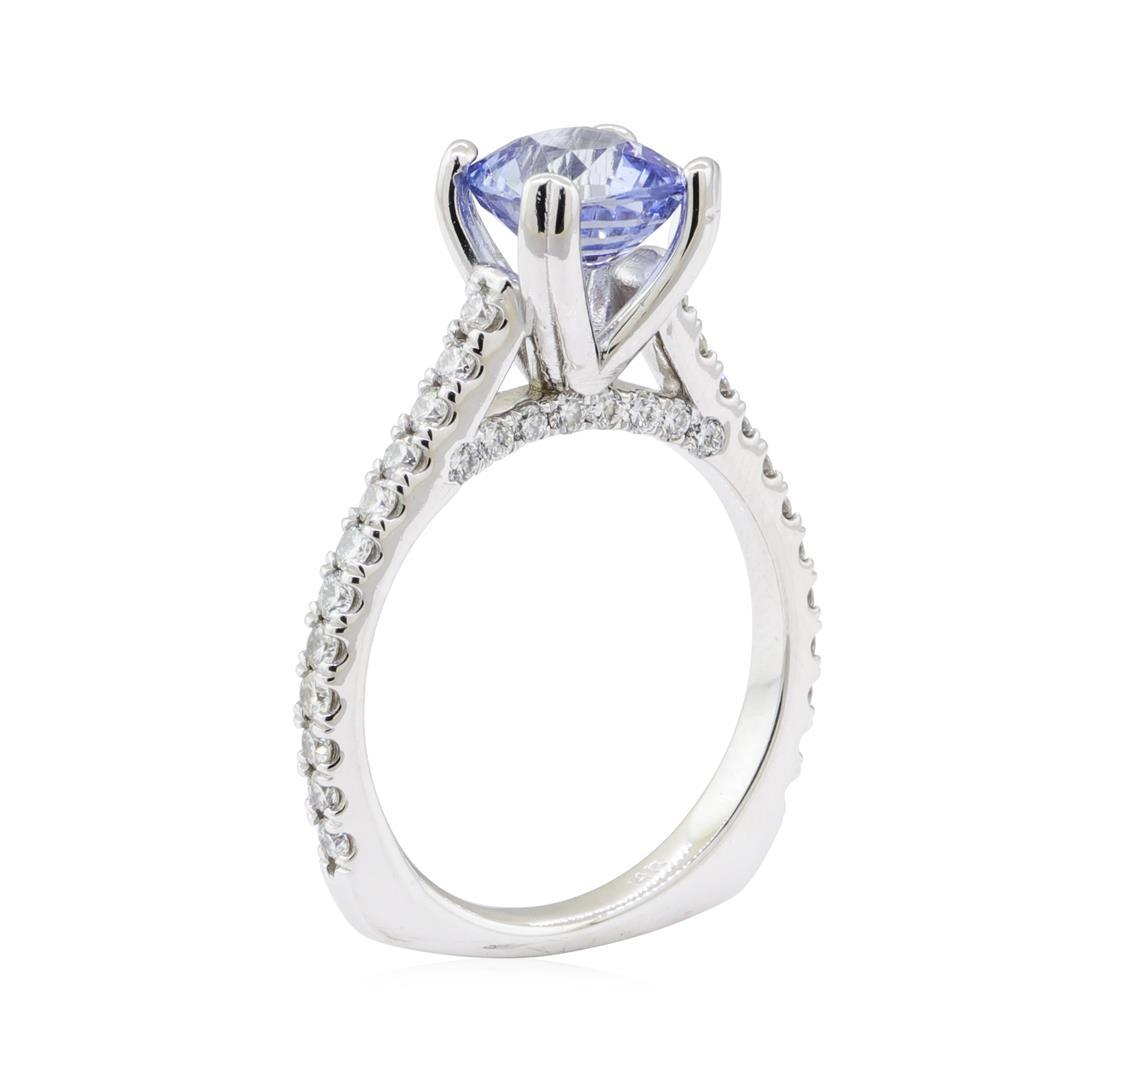 3.06 ctw Sapphire and Diamond Ring - 14KT White Gold